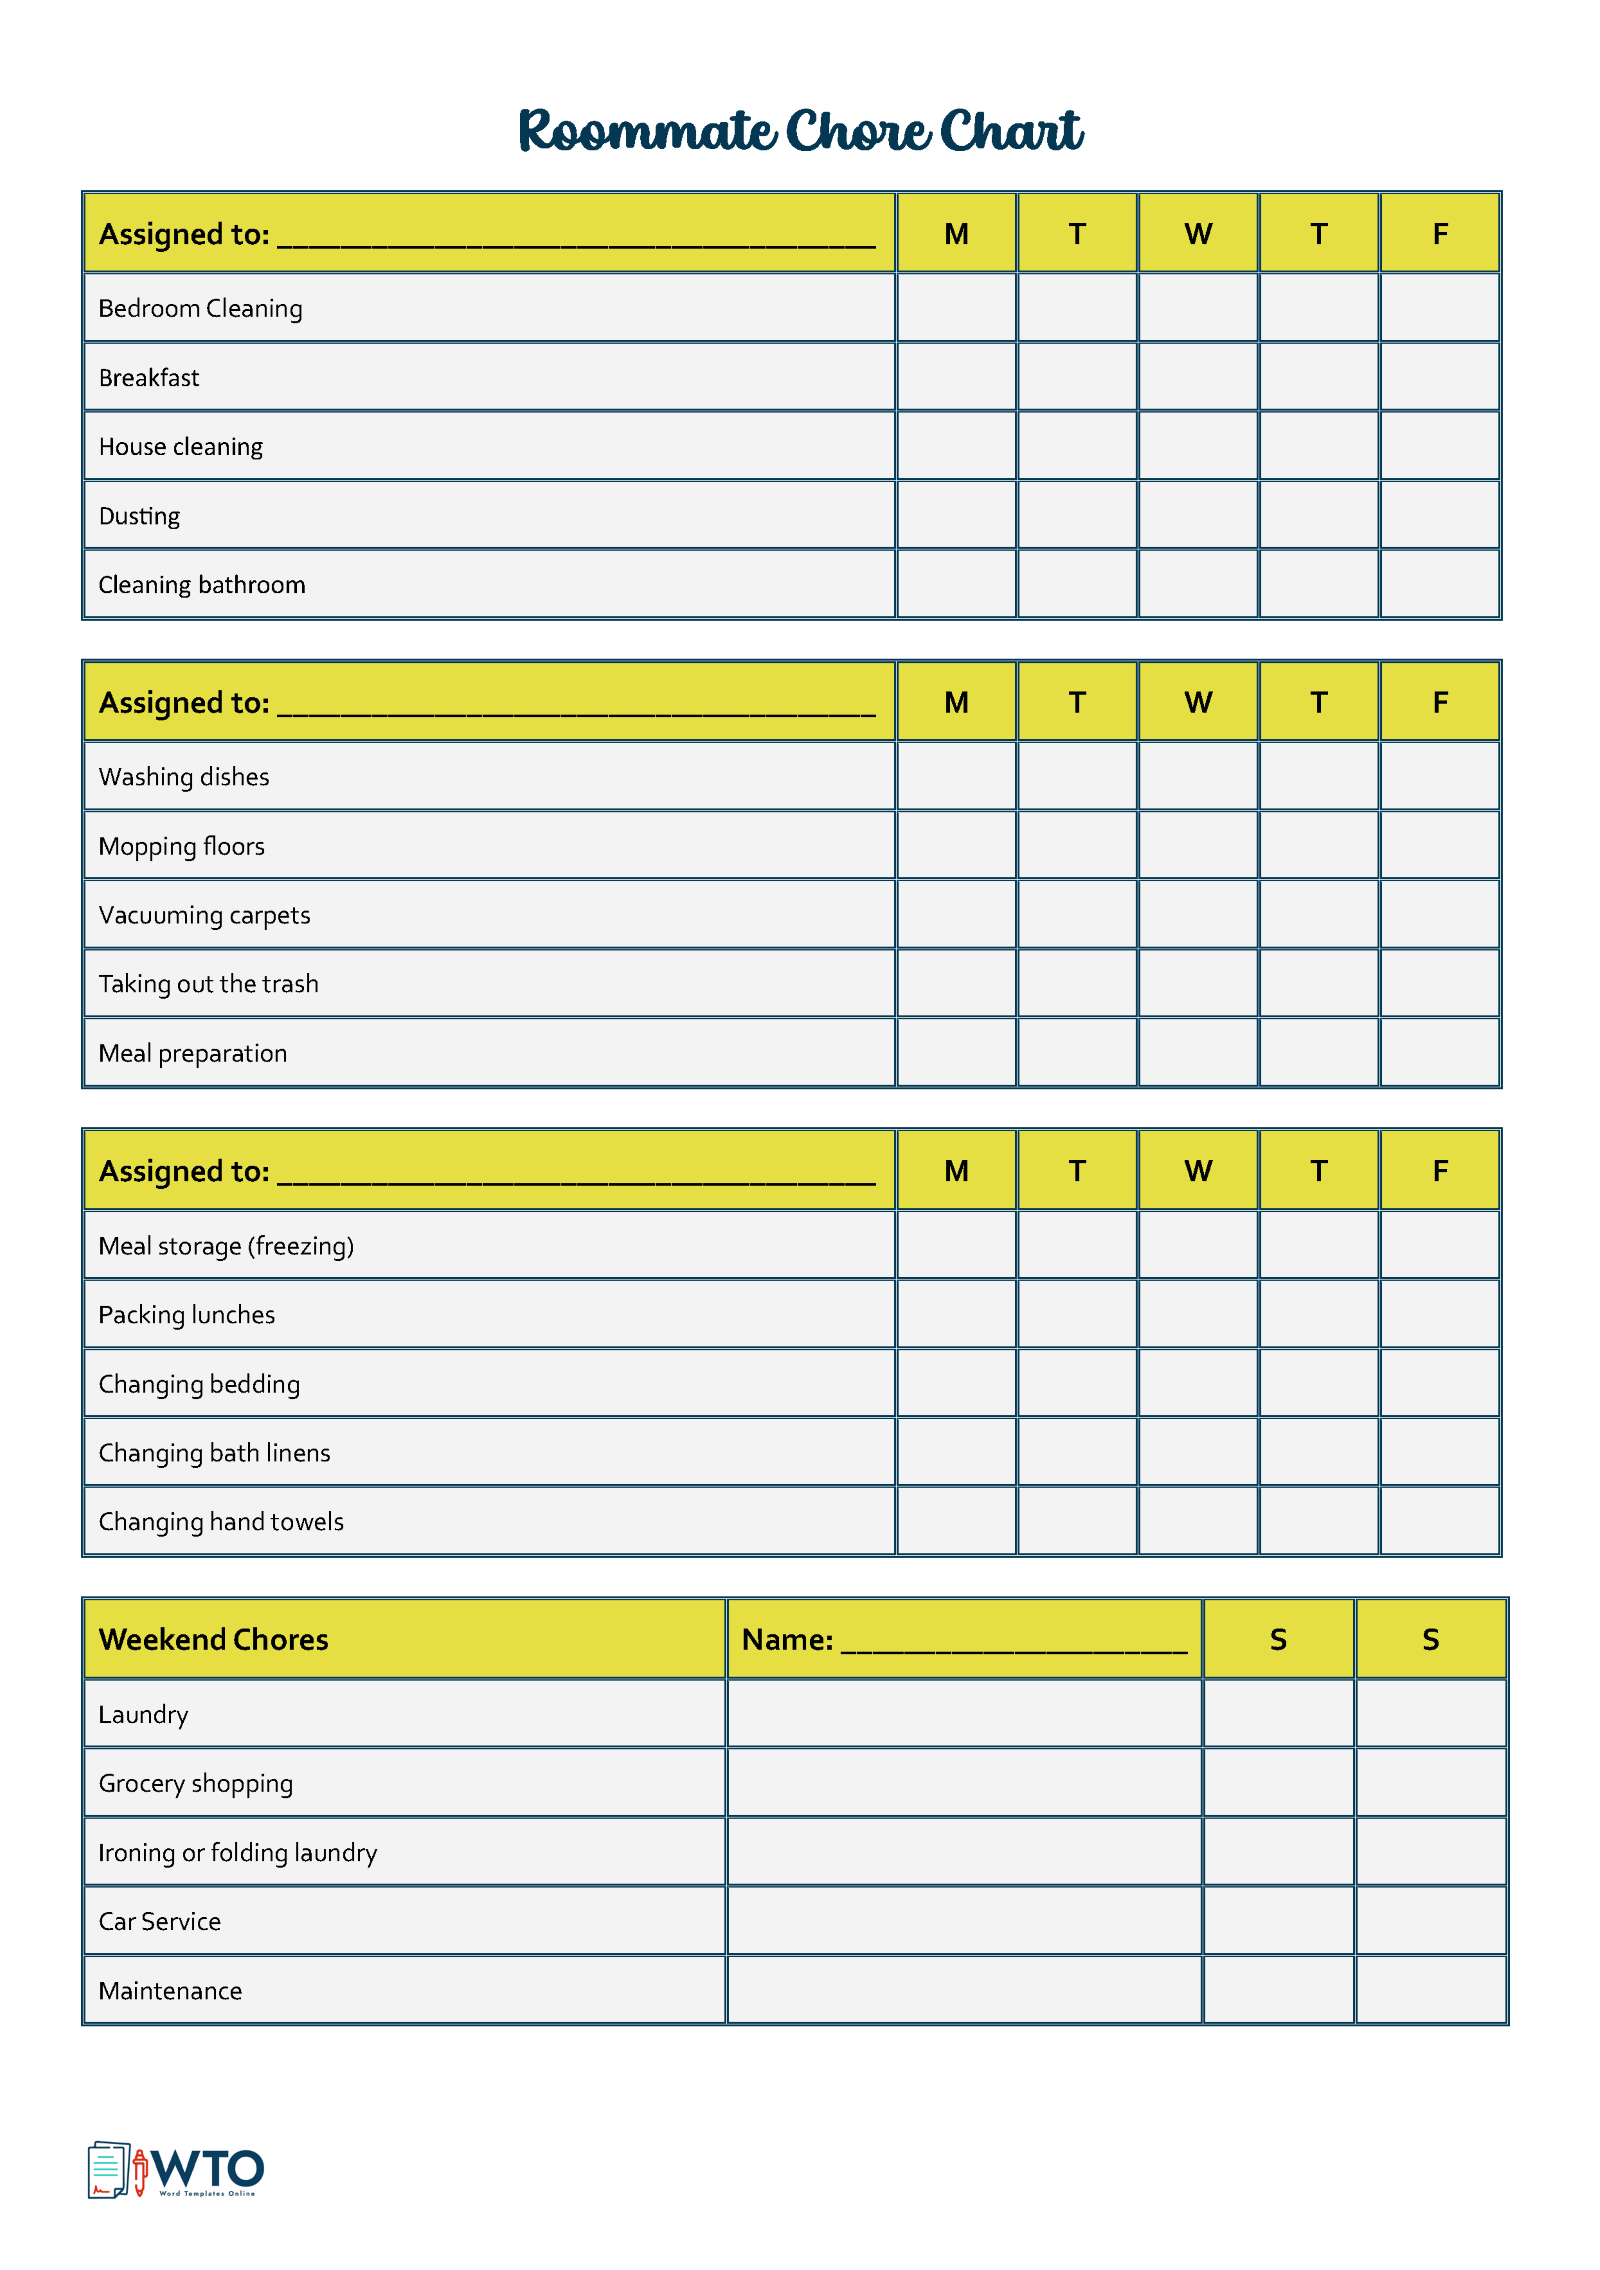 Editable Roommate Chore Chart Example: Efficient Chores